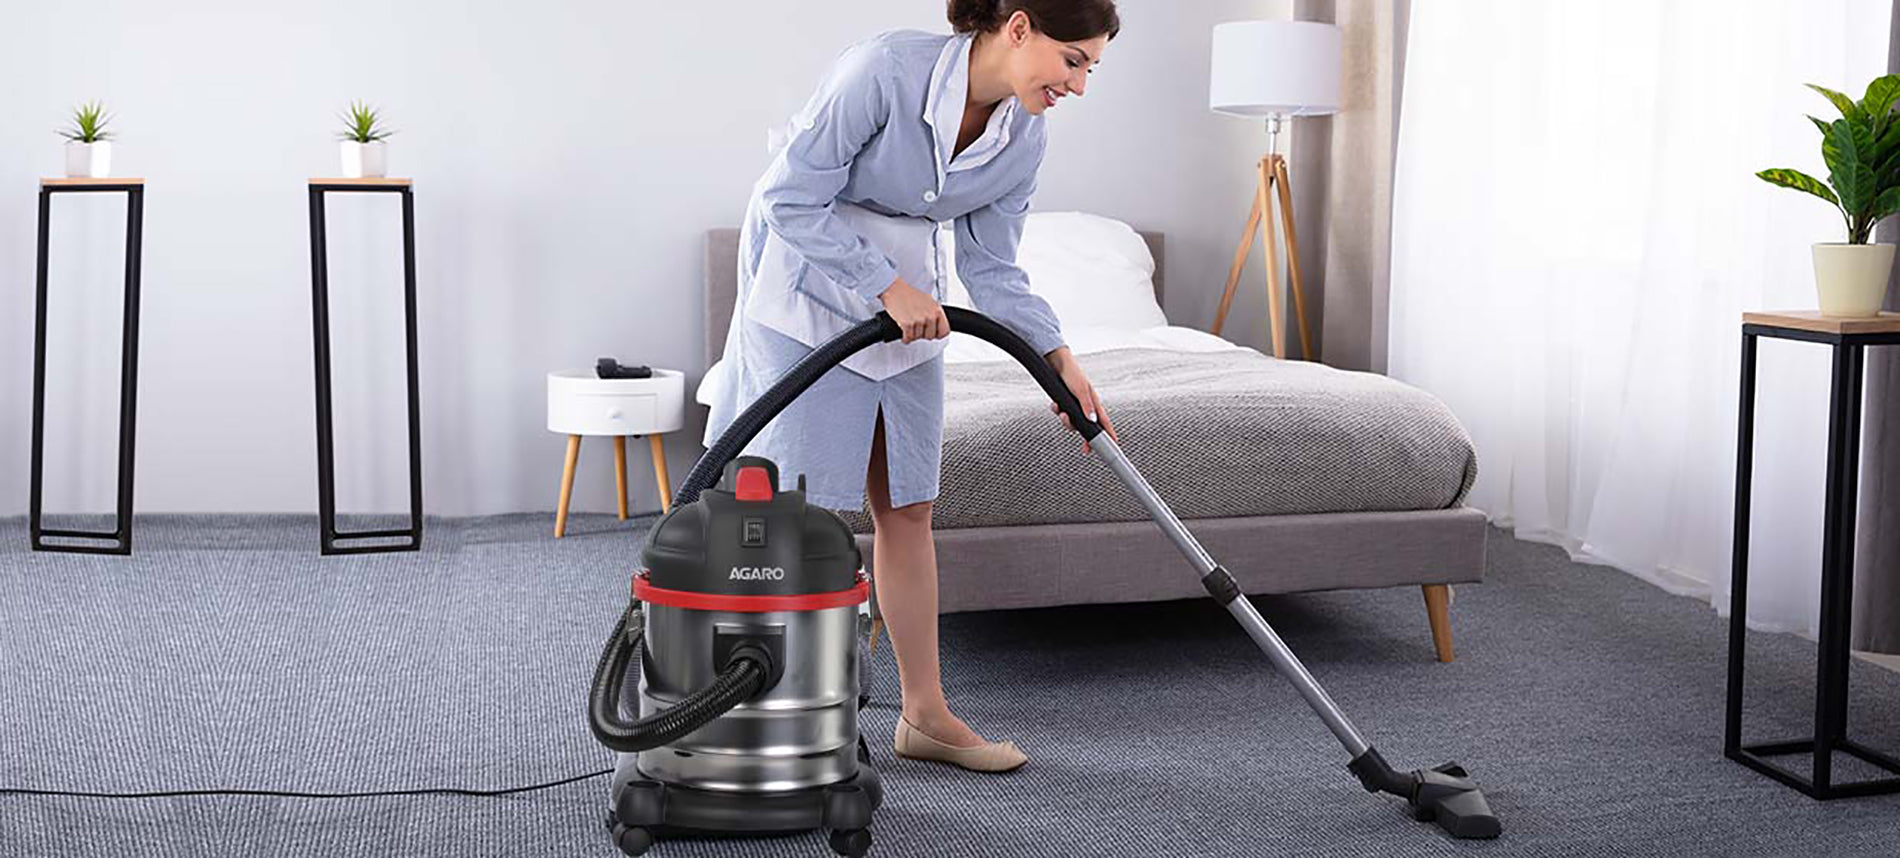 Top Things to Clean Using Your Wet and Dry Vacuum Cleaner – Agaro